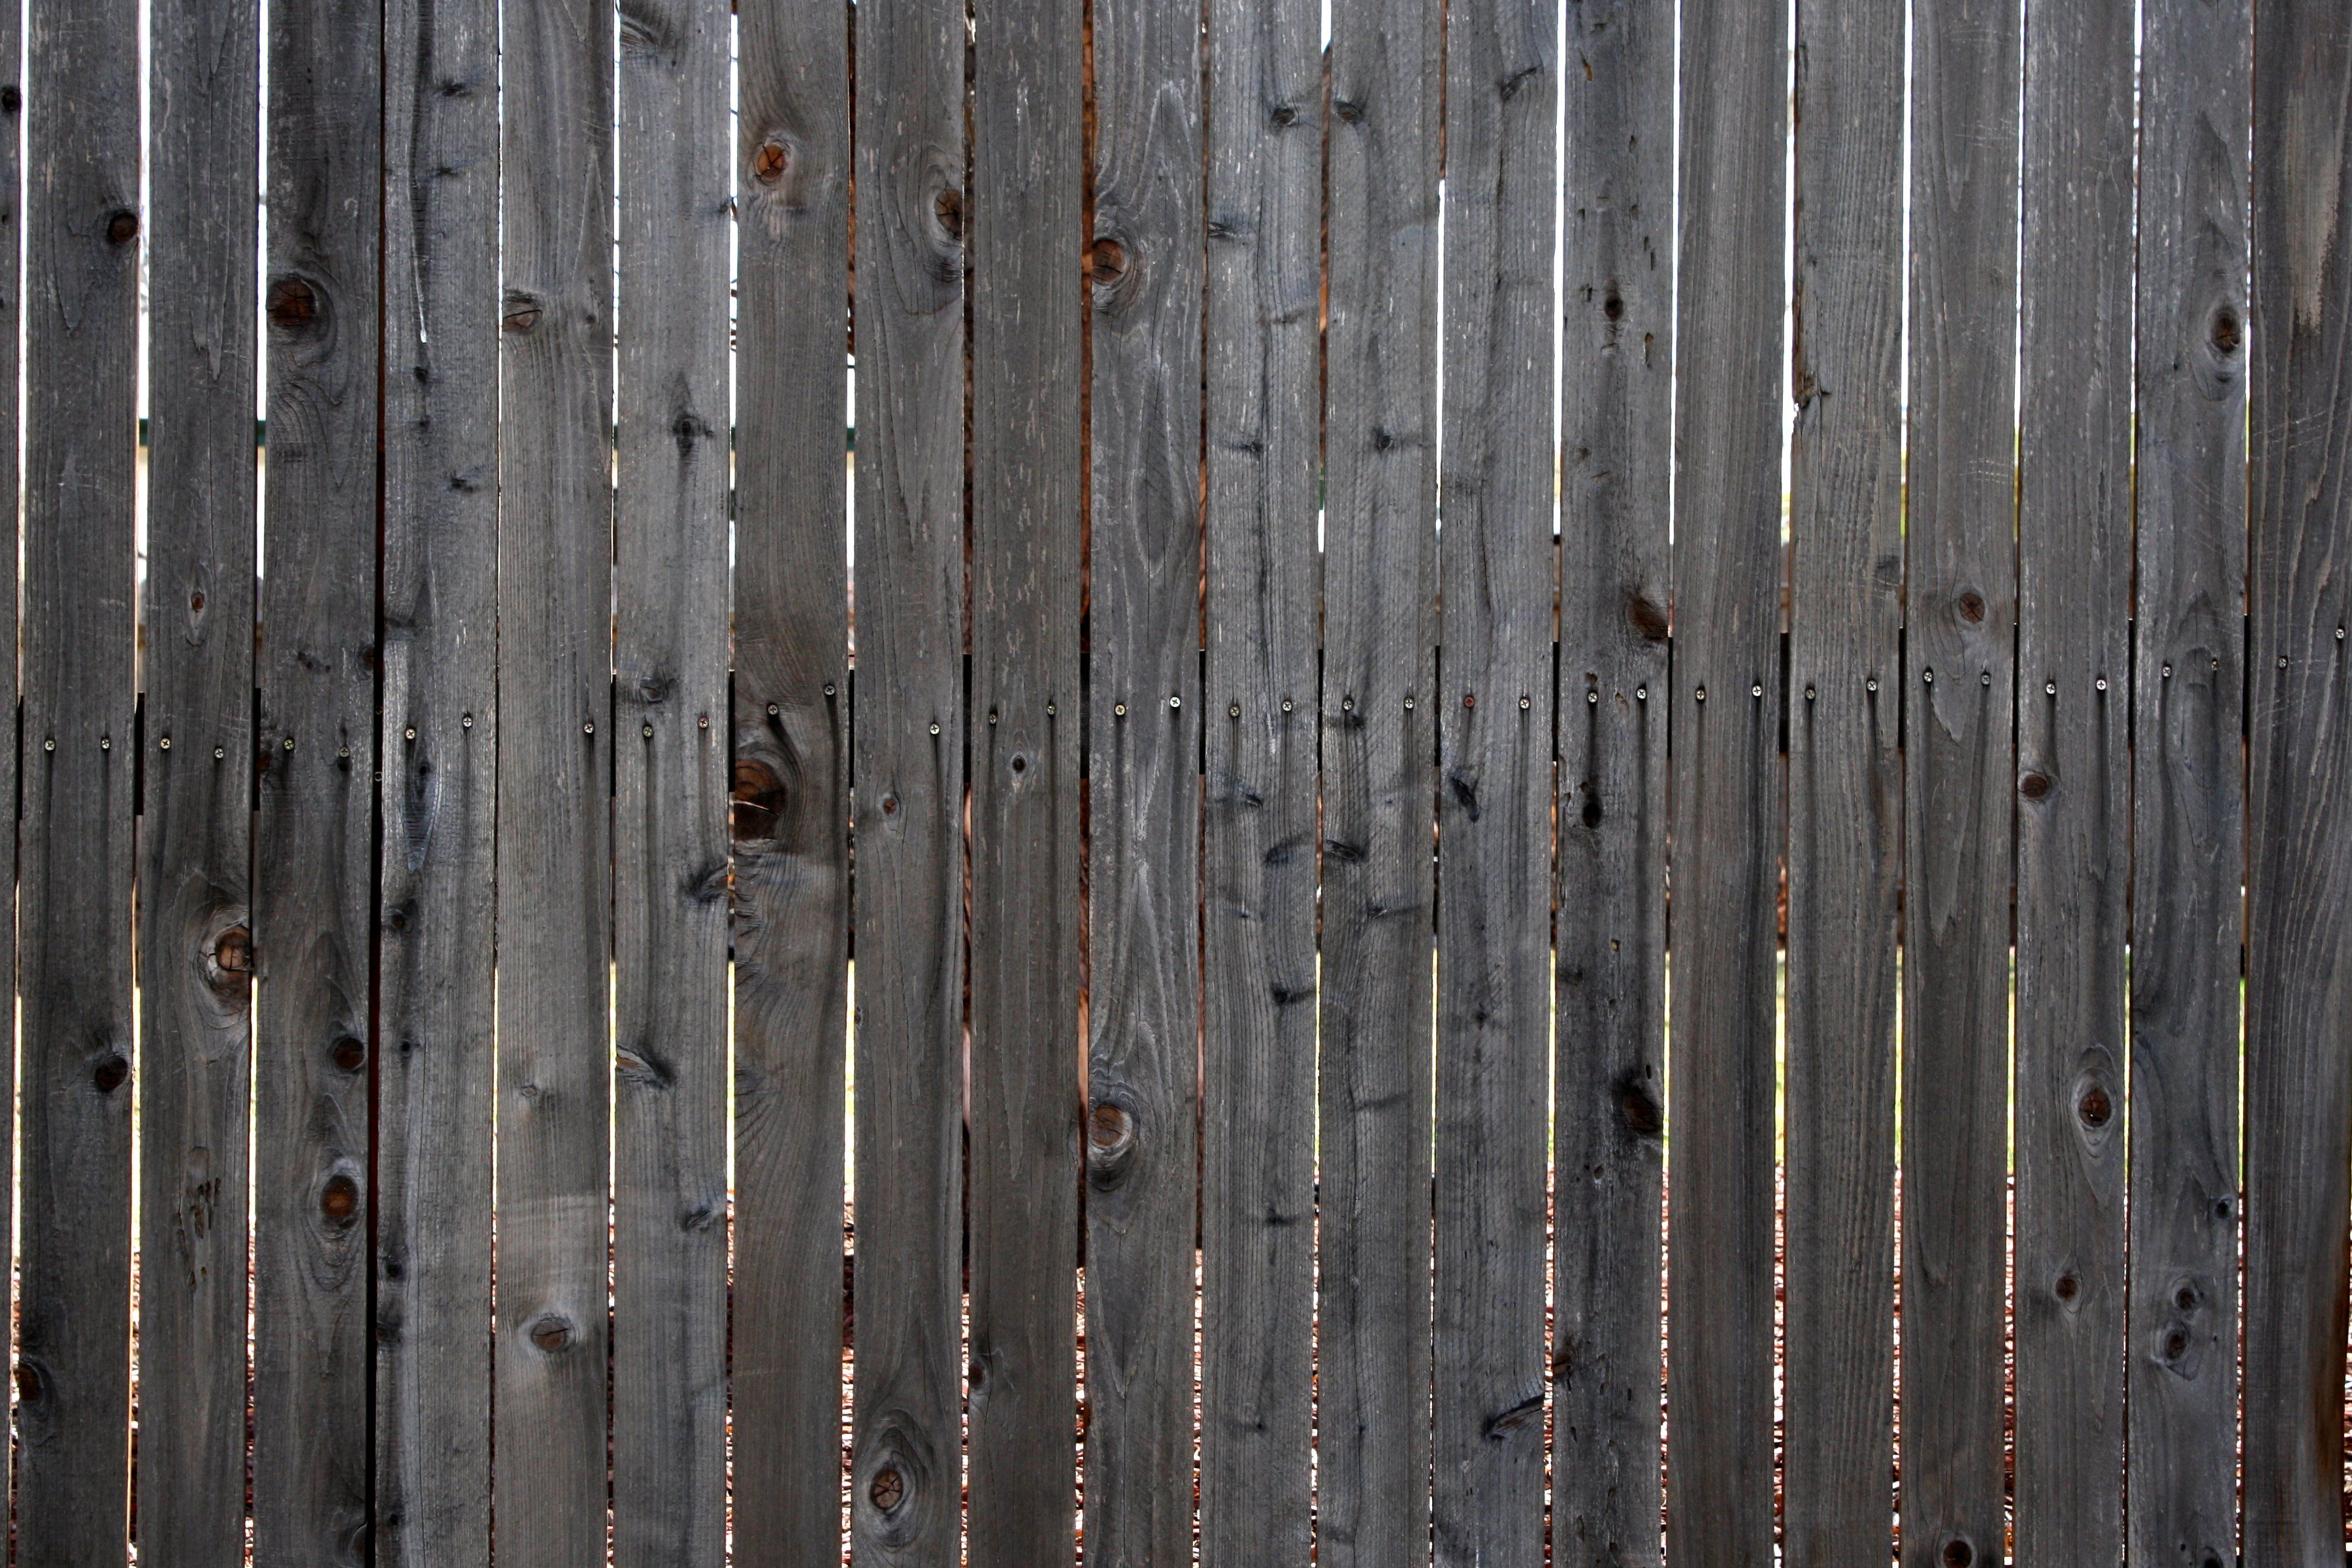 Share Goodness Plank Board – rusted fence